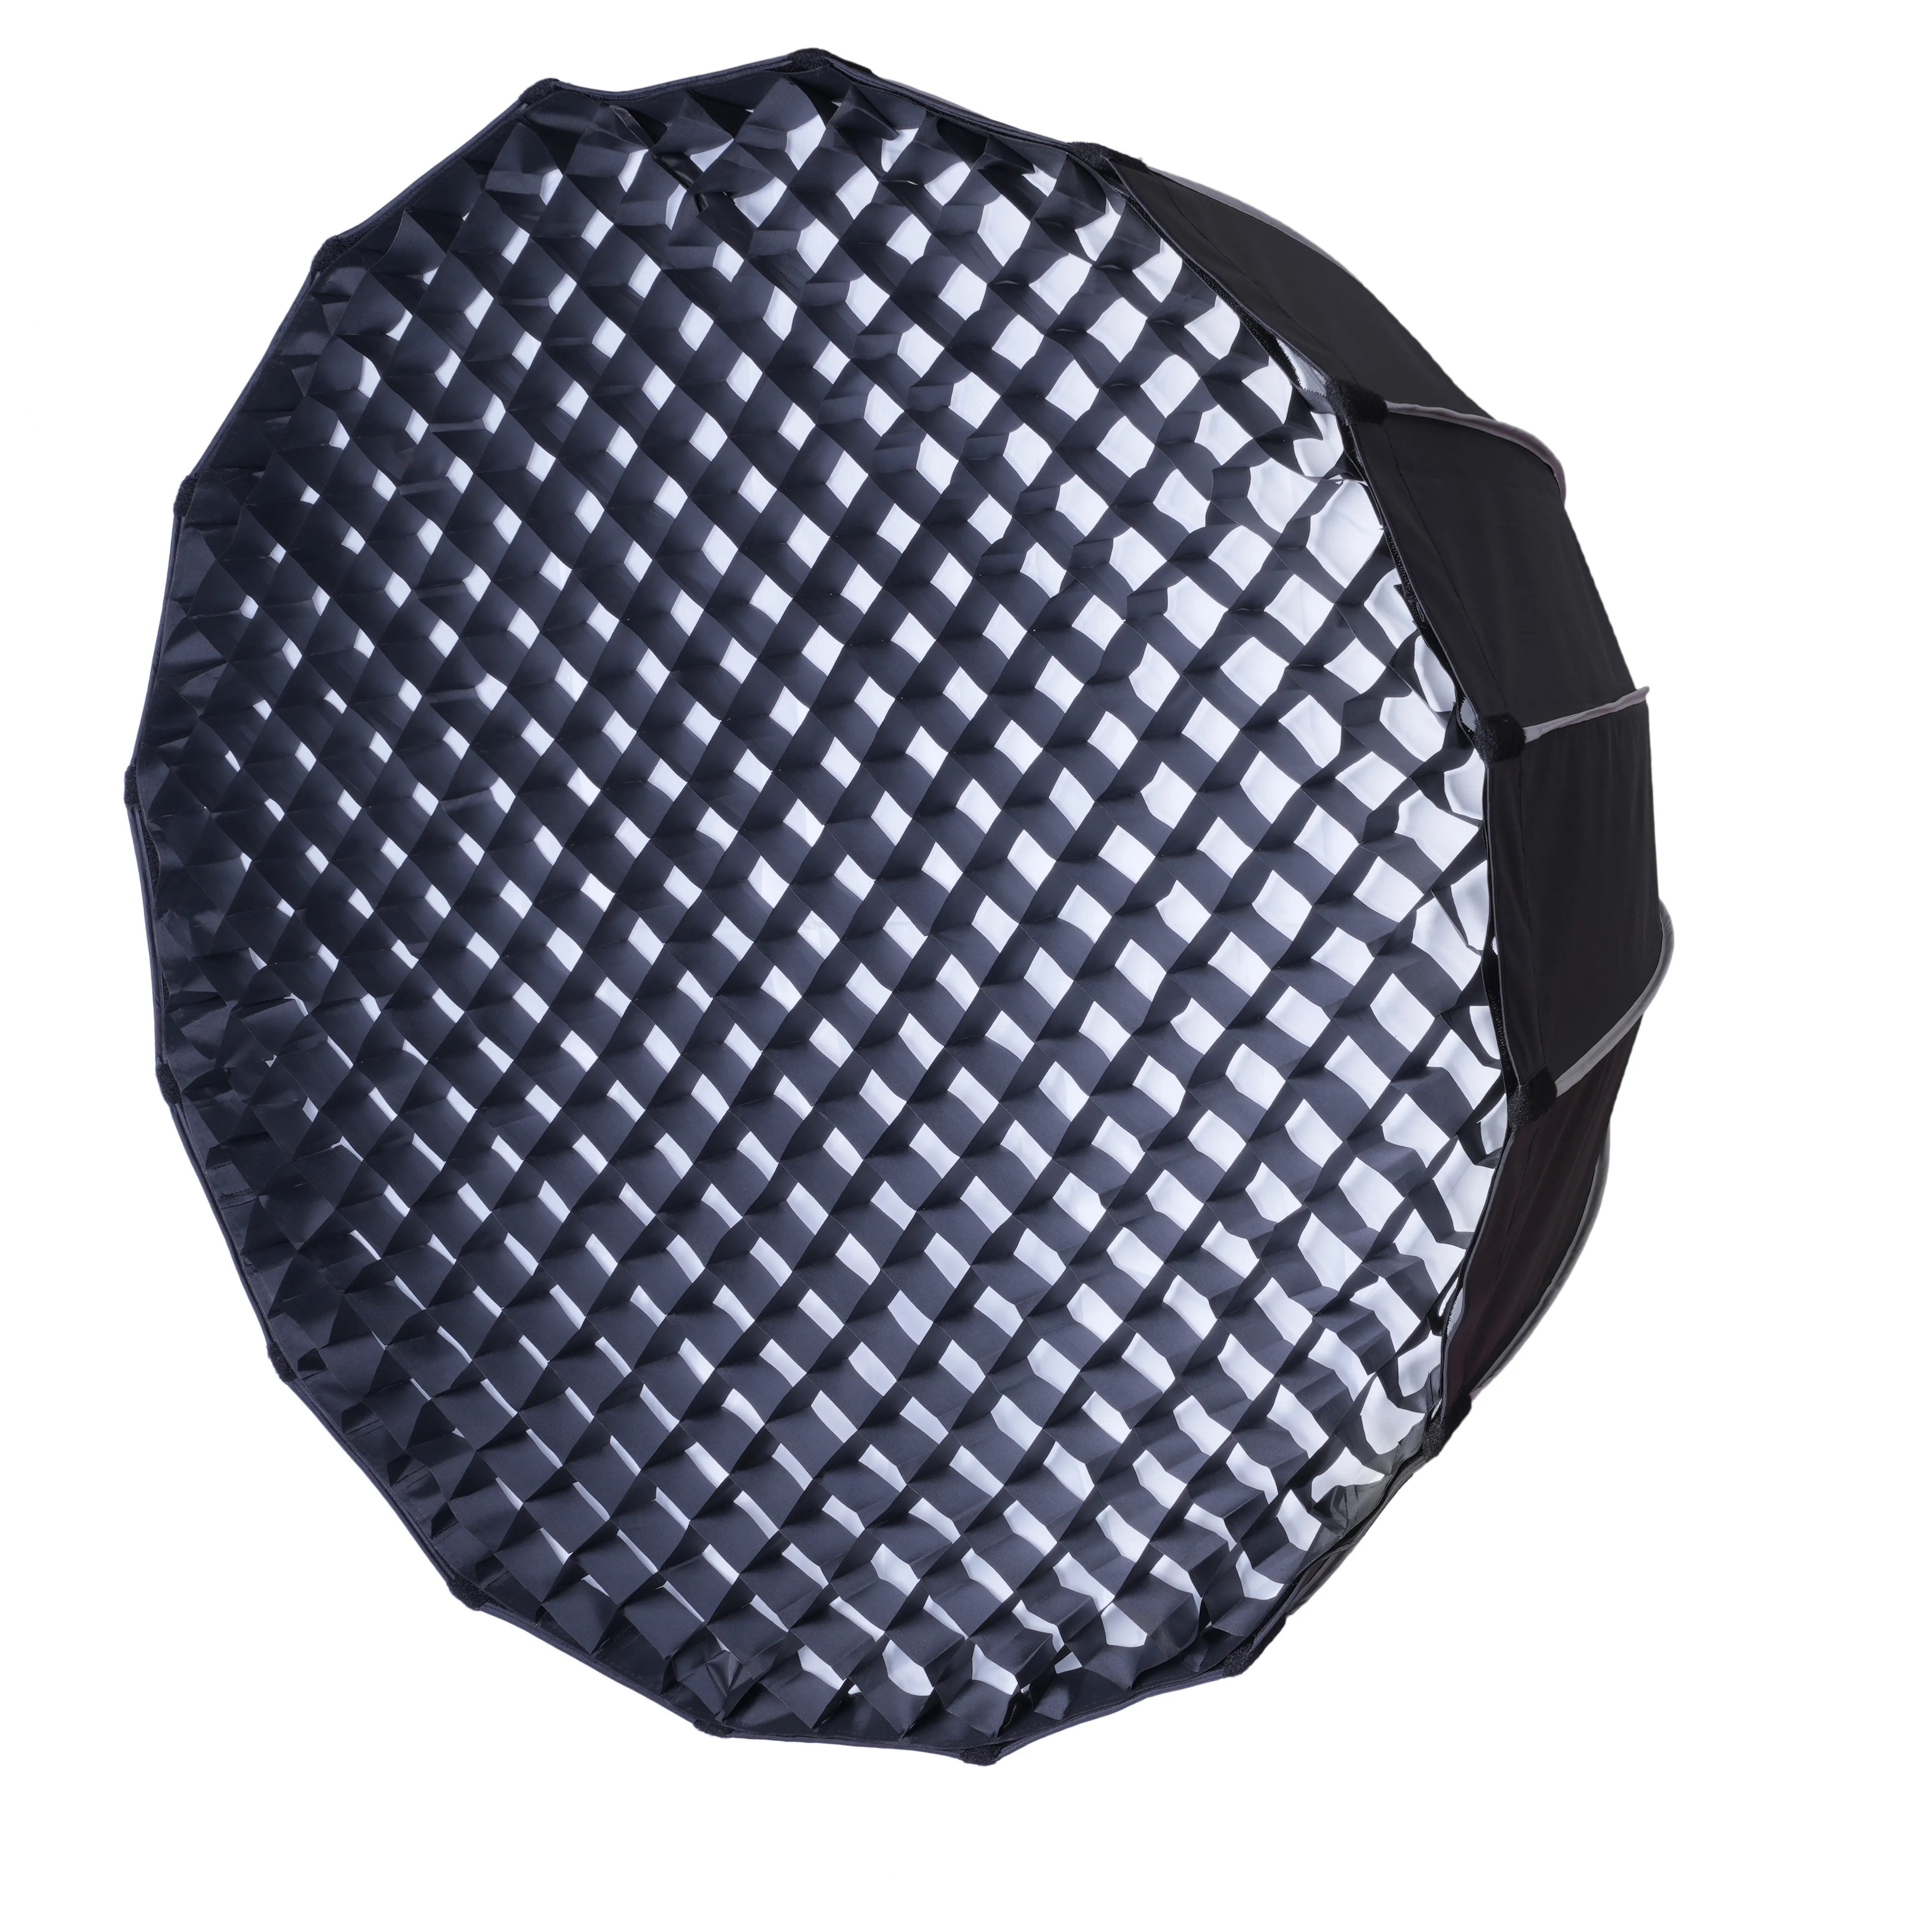 90CM 35'' Quickly Release Parabolic Deep Softbox +Honeycomb Grid with Bowens Mount for Photo Studio Flash Lamp